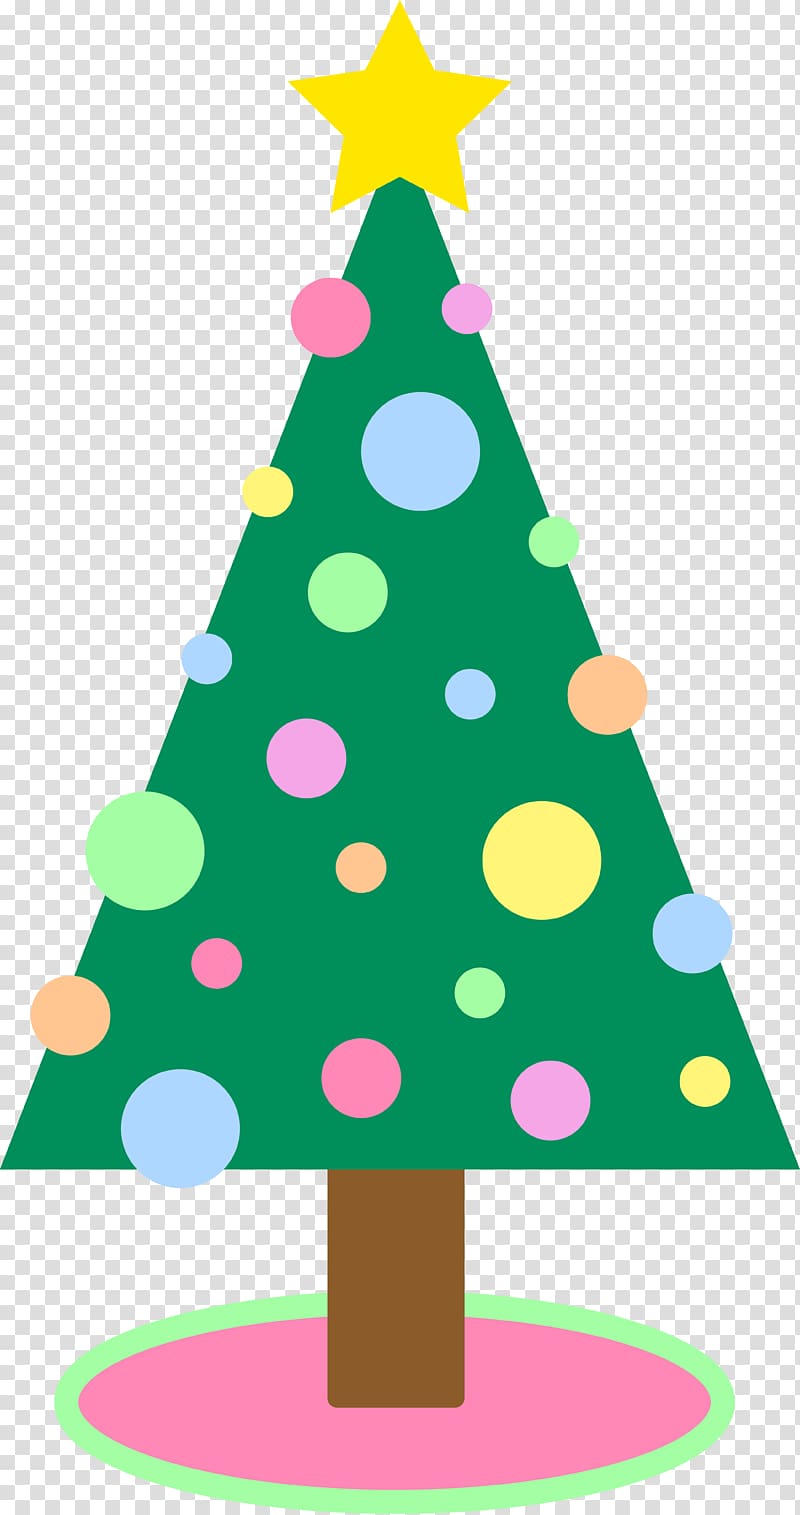 Santa Claus Christmas tree Christmas ornament , Cute Holiday transparent background PNG clipart